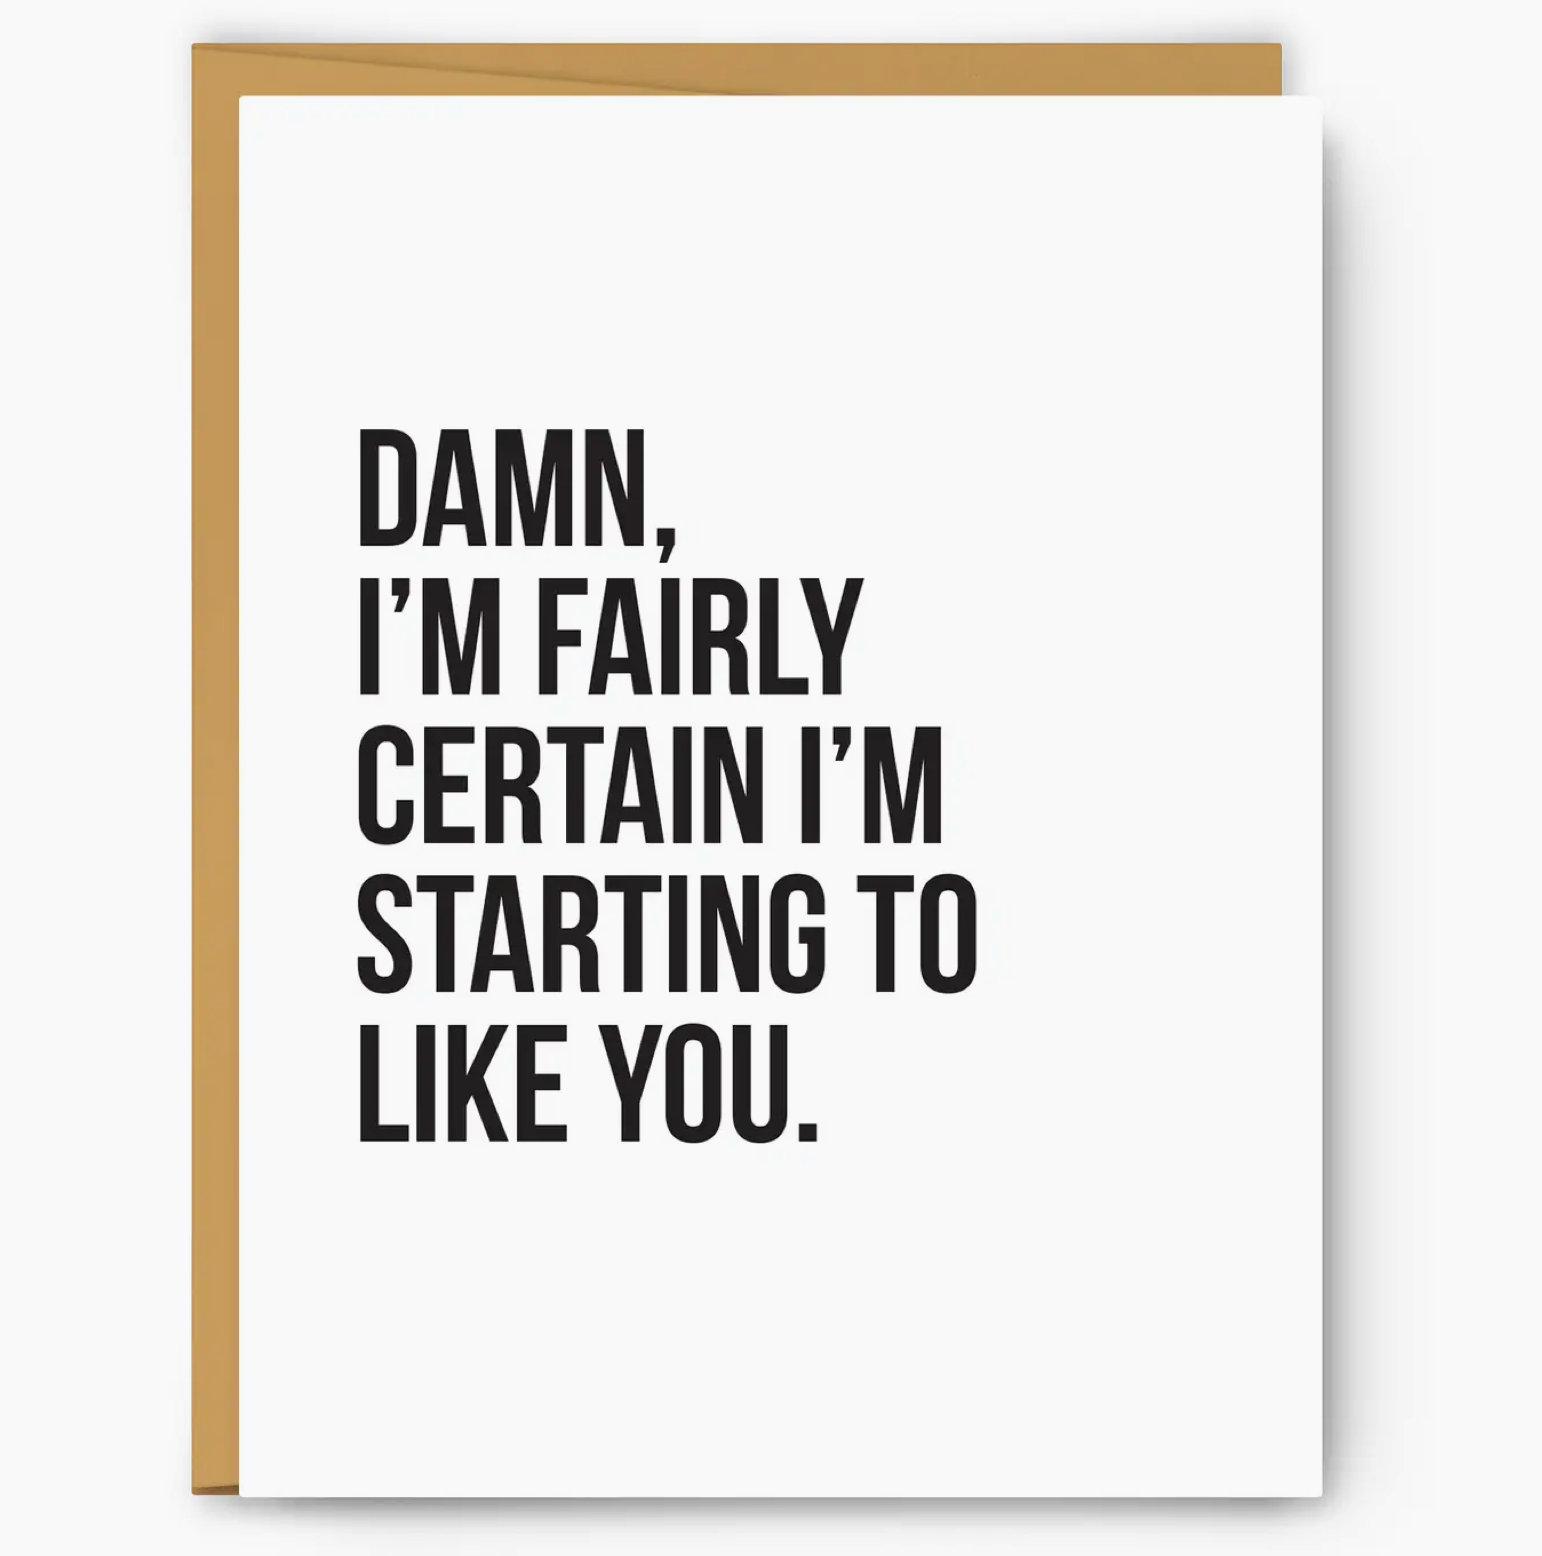 Damn, I'm fairly certain I'm starting to like you - Greeting Card